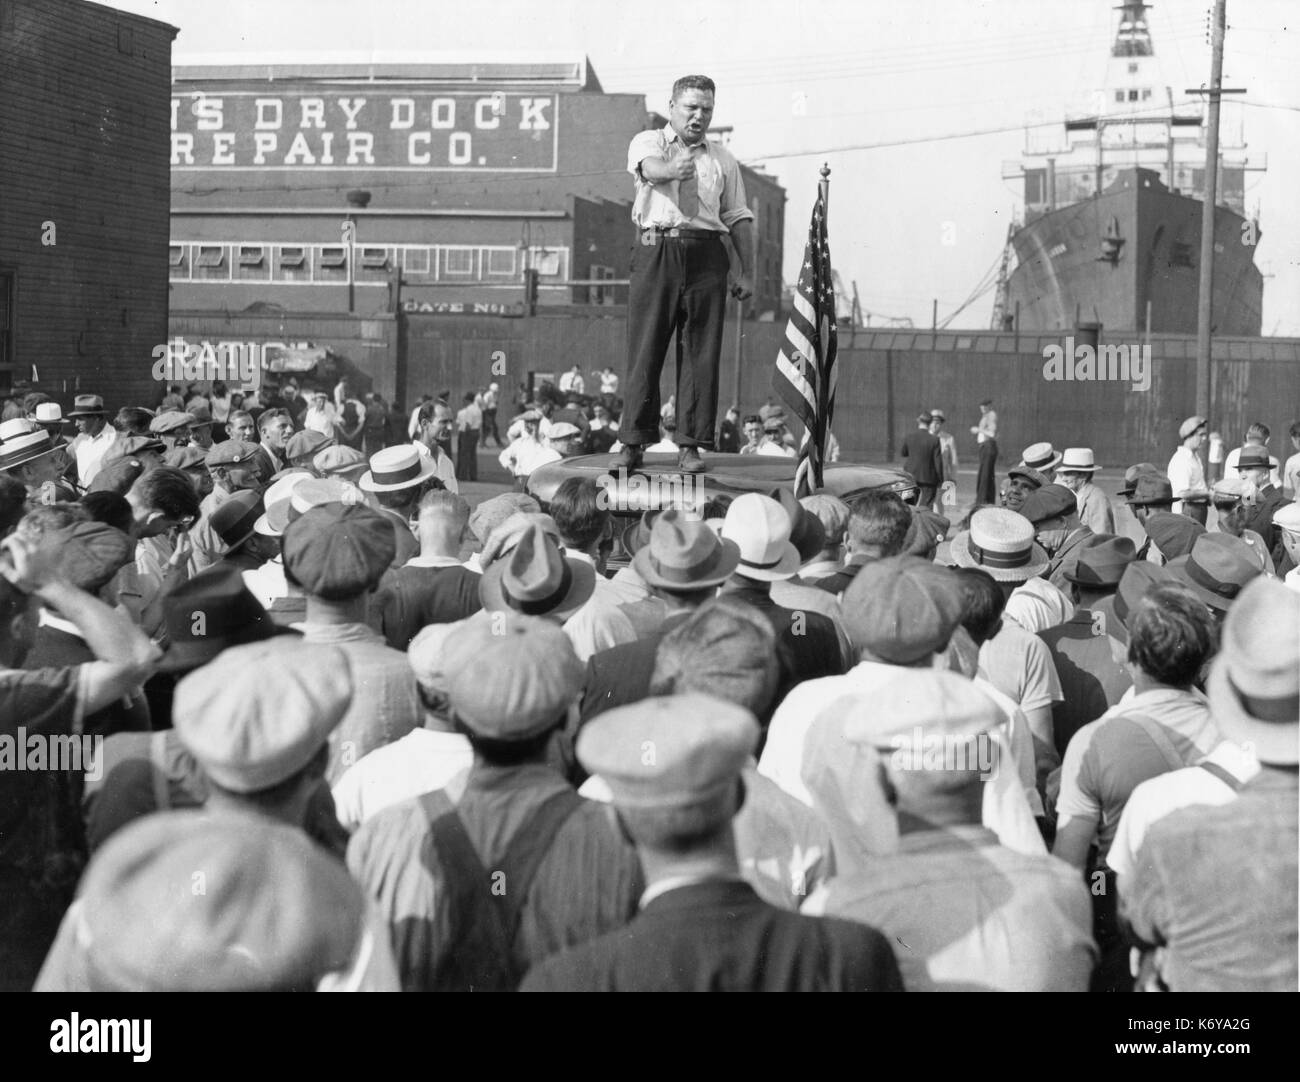 Union organizer during the 1930's militantly urges longshore workers to join the Union. Brooklyn, NY, 1930s. Stock Photo